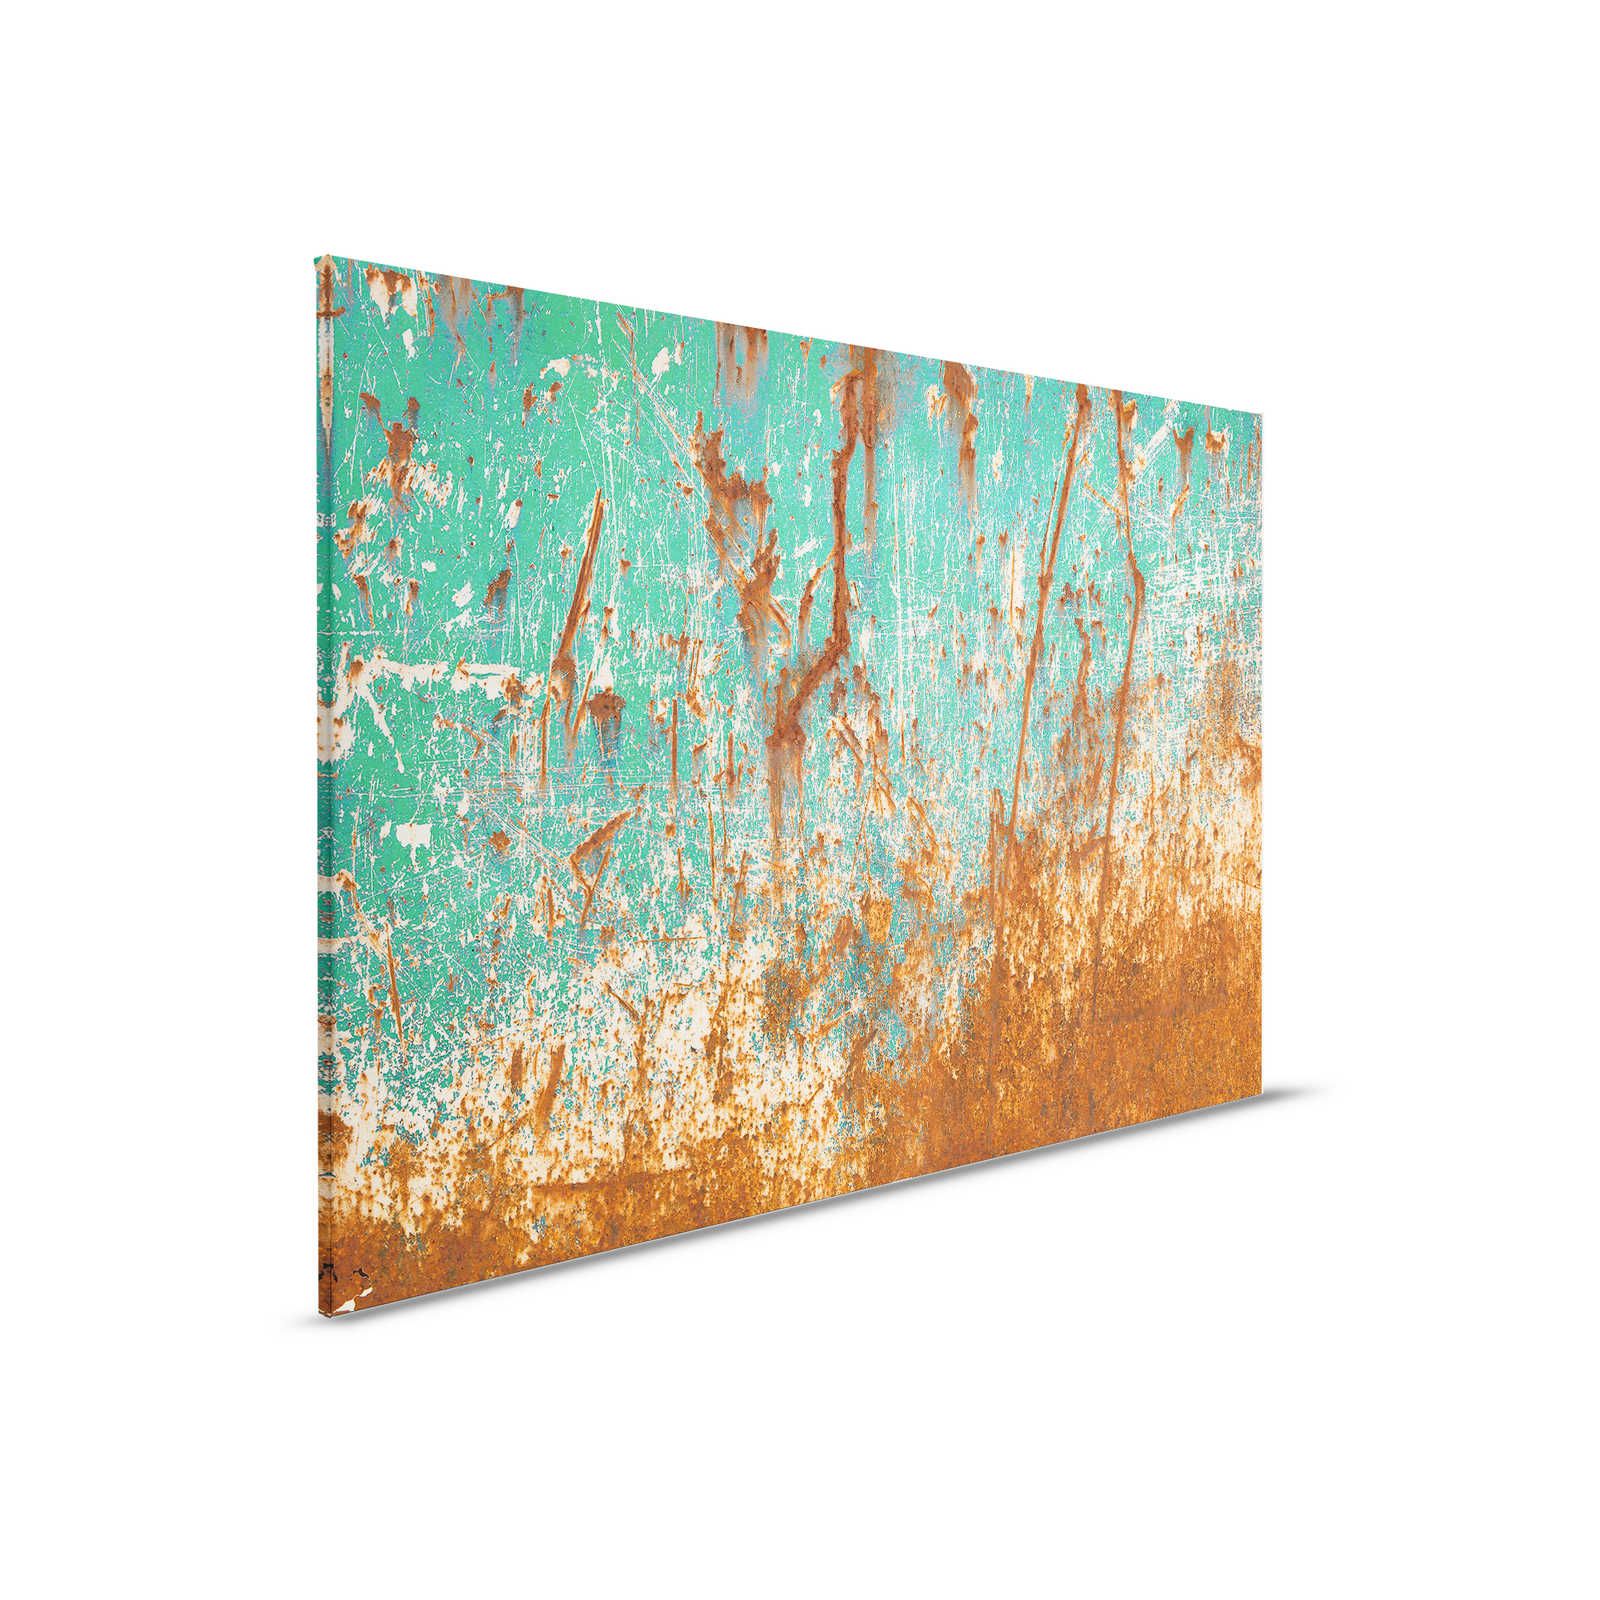         Metal Industrial Style Canvas Painting Rust Look - 0.90 m x 0.60 m
    